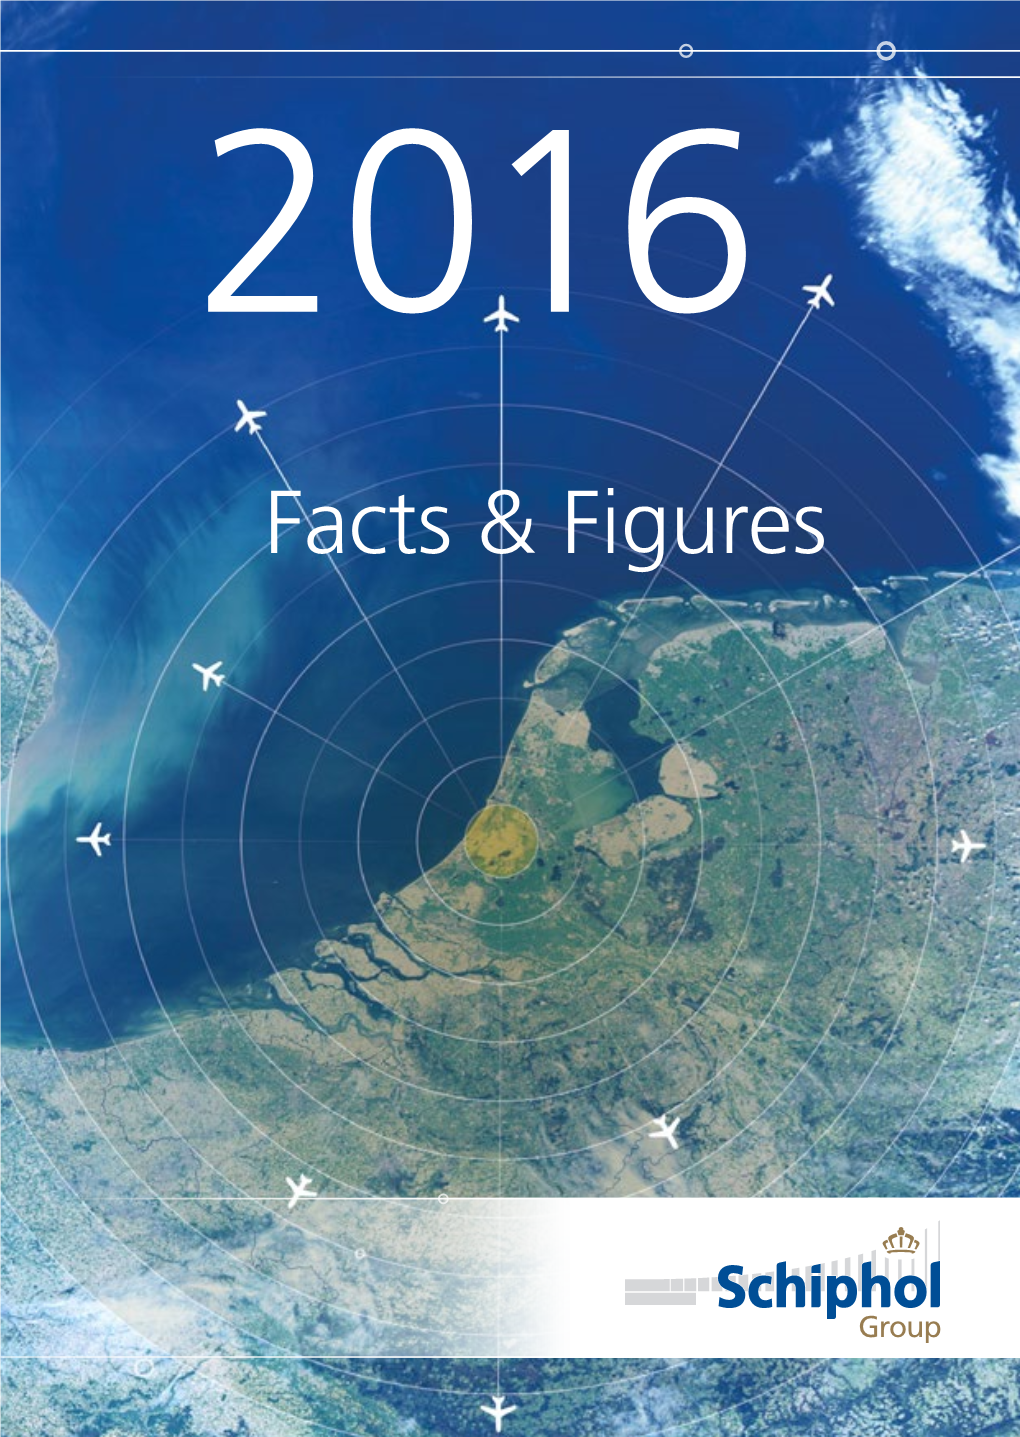 Download All Facts and Figures of 2016 (2 MB .Pdf)